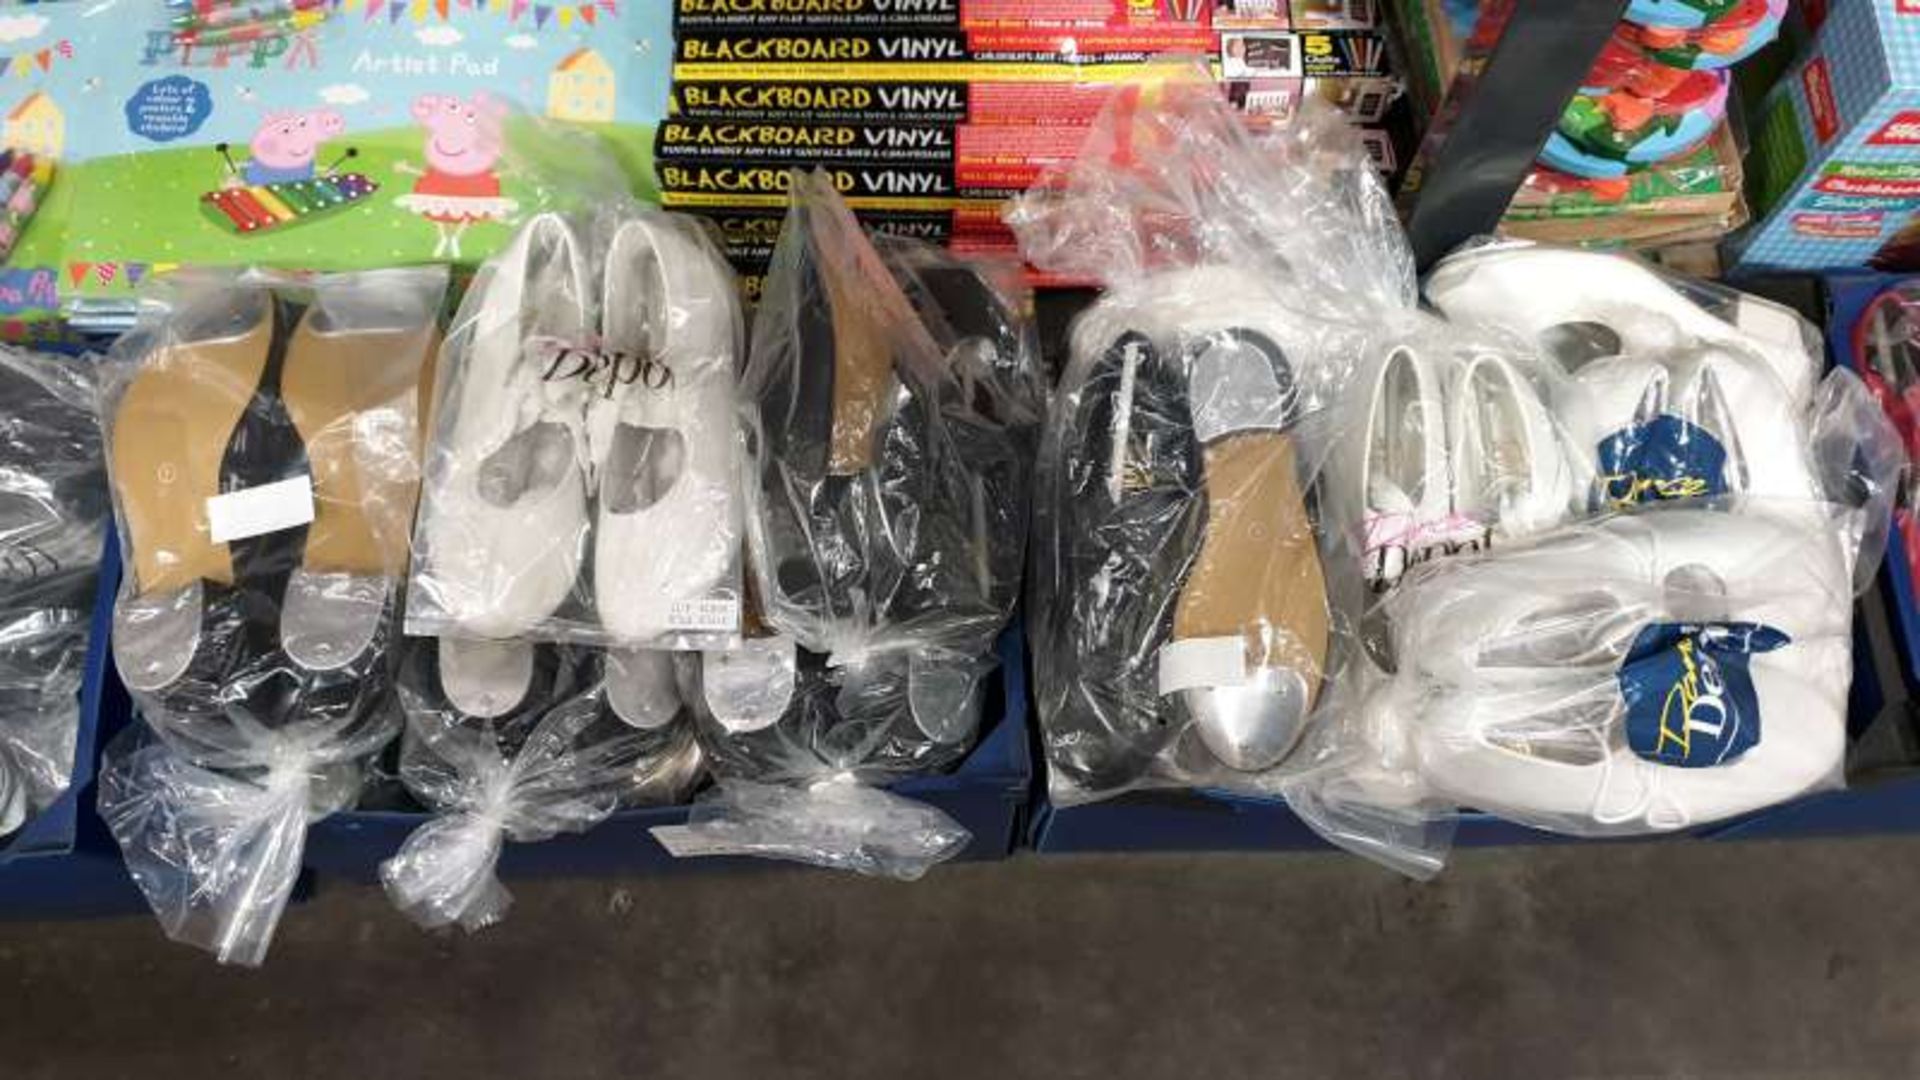 50 X BRAND NEW DANCE SHOES/PUMPS IN VARIOUS STYLES AND SIZES IN 2 BOXES